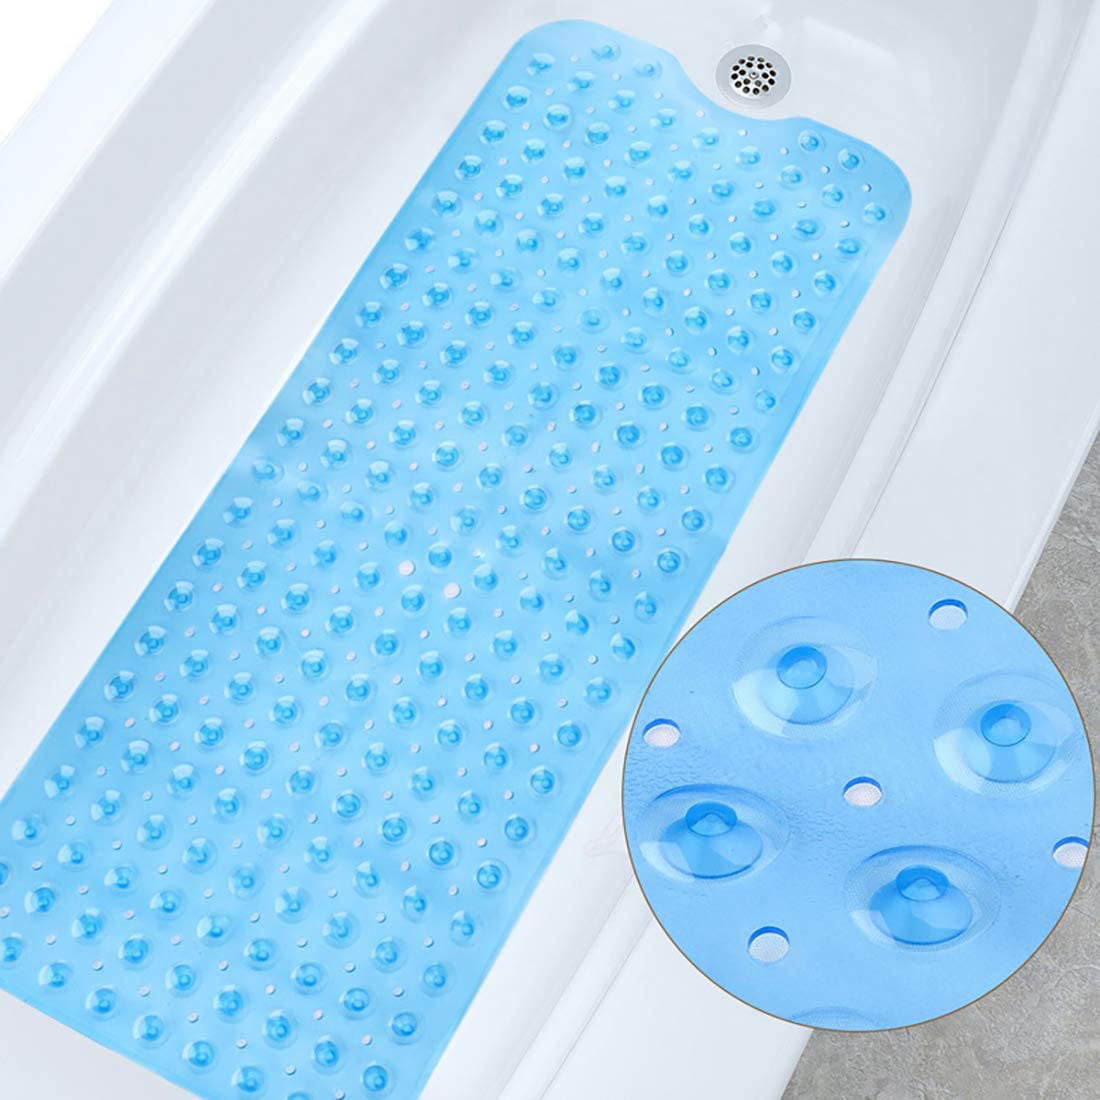 Details about   Silicone Non-Slip Shower Bath Mat Bathroom Mat with Drain Holes and Suction Cup 